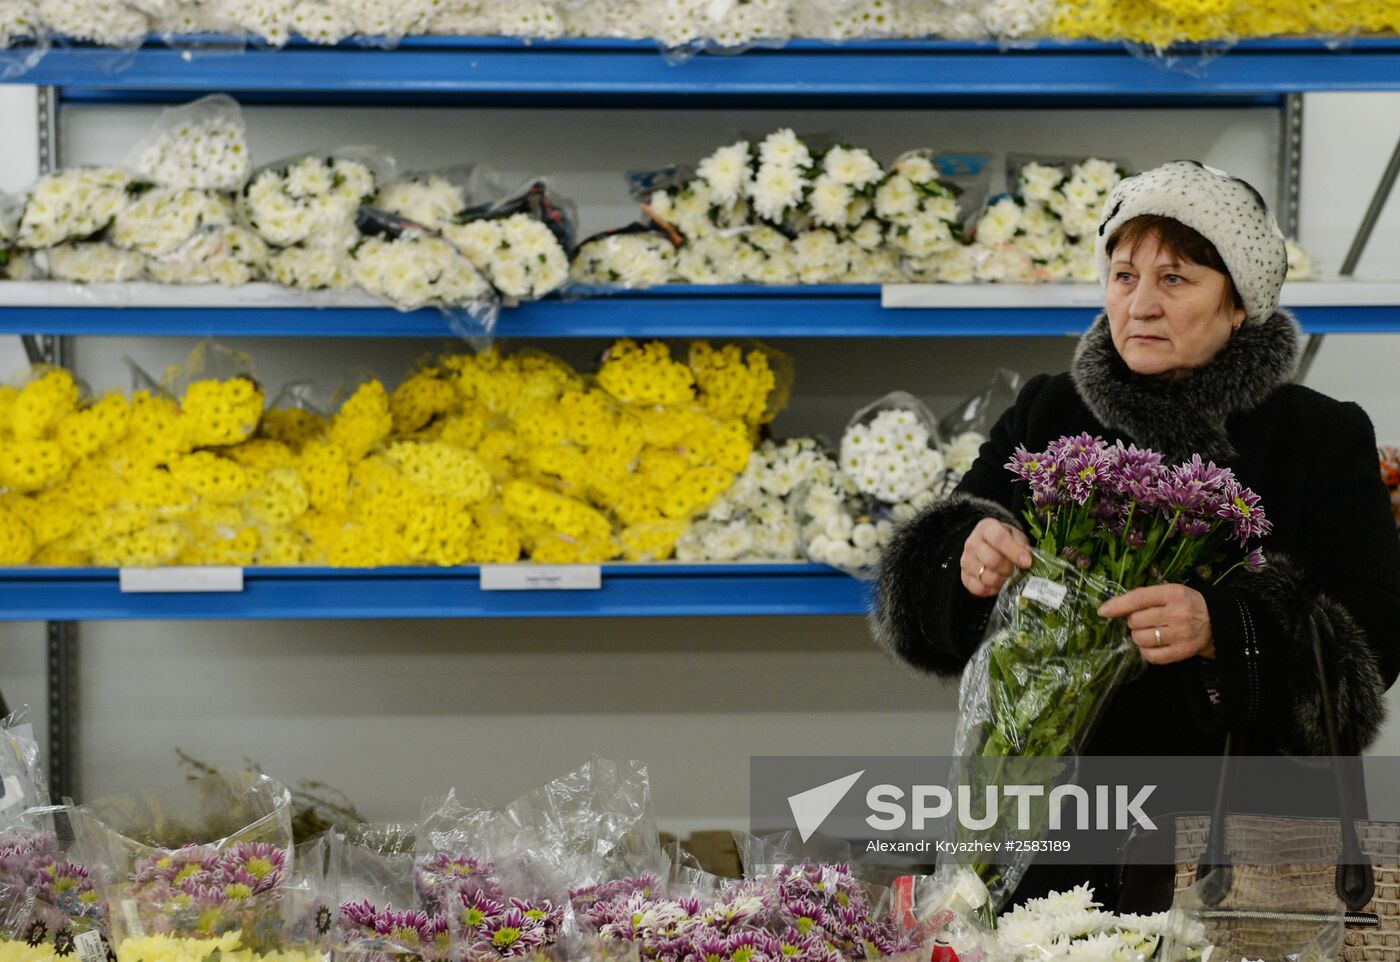 Selling flowers in the lead-up to International Women's Day in Novosibirsk